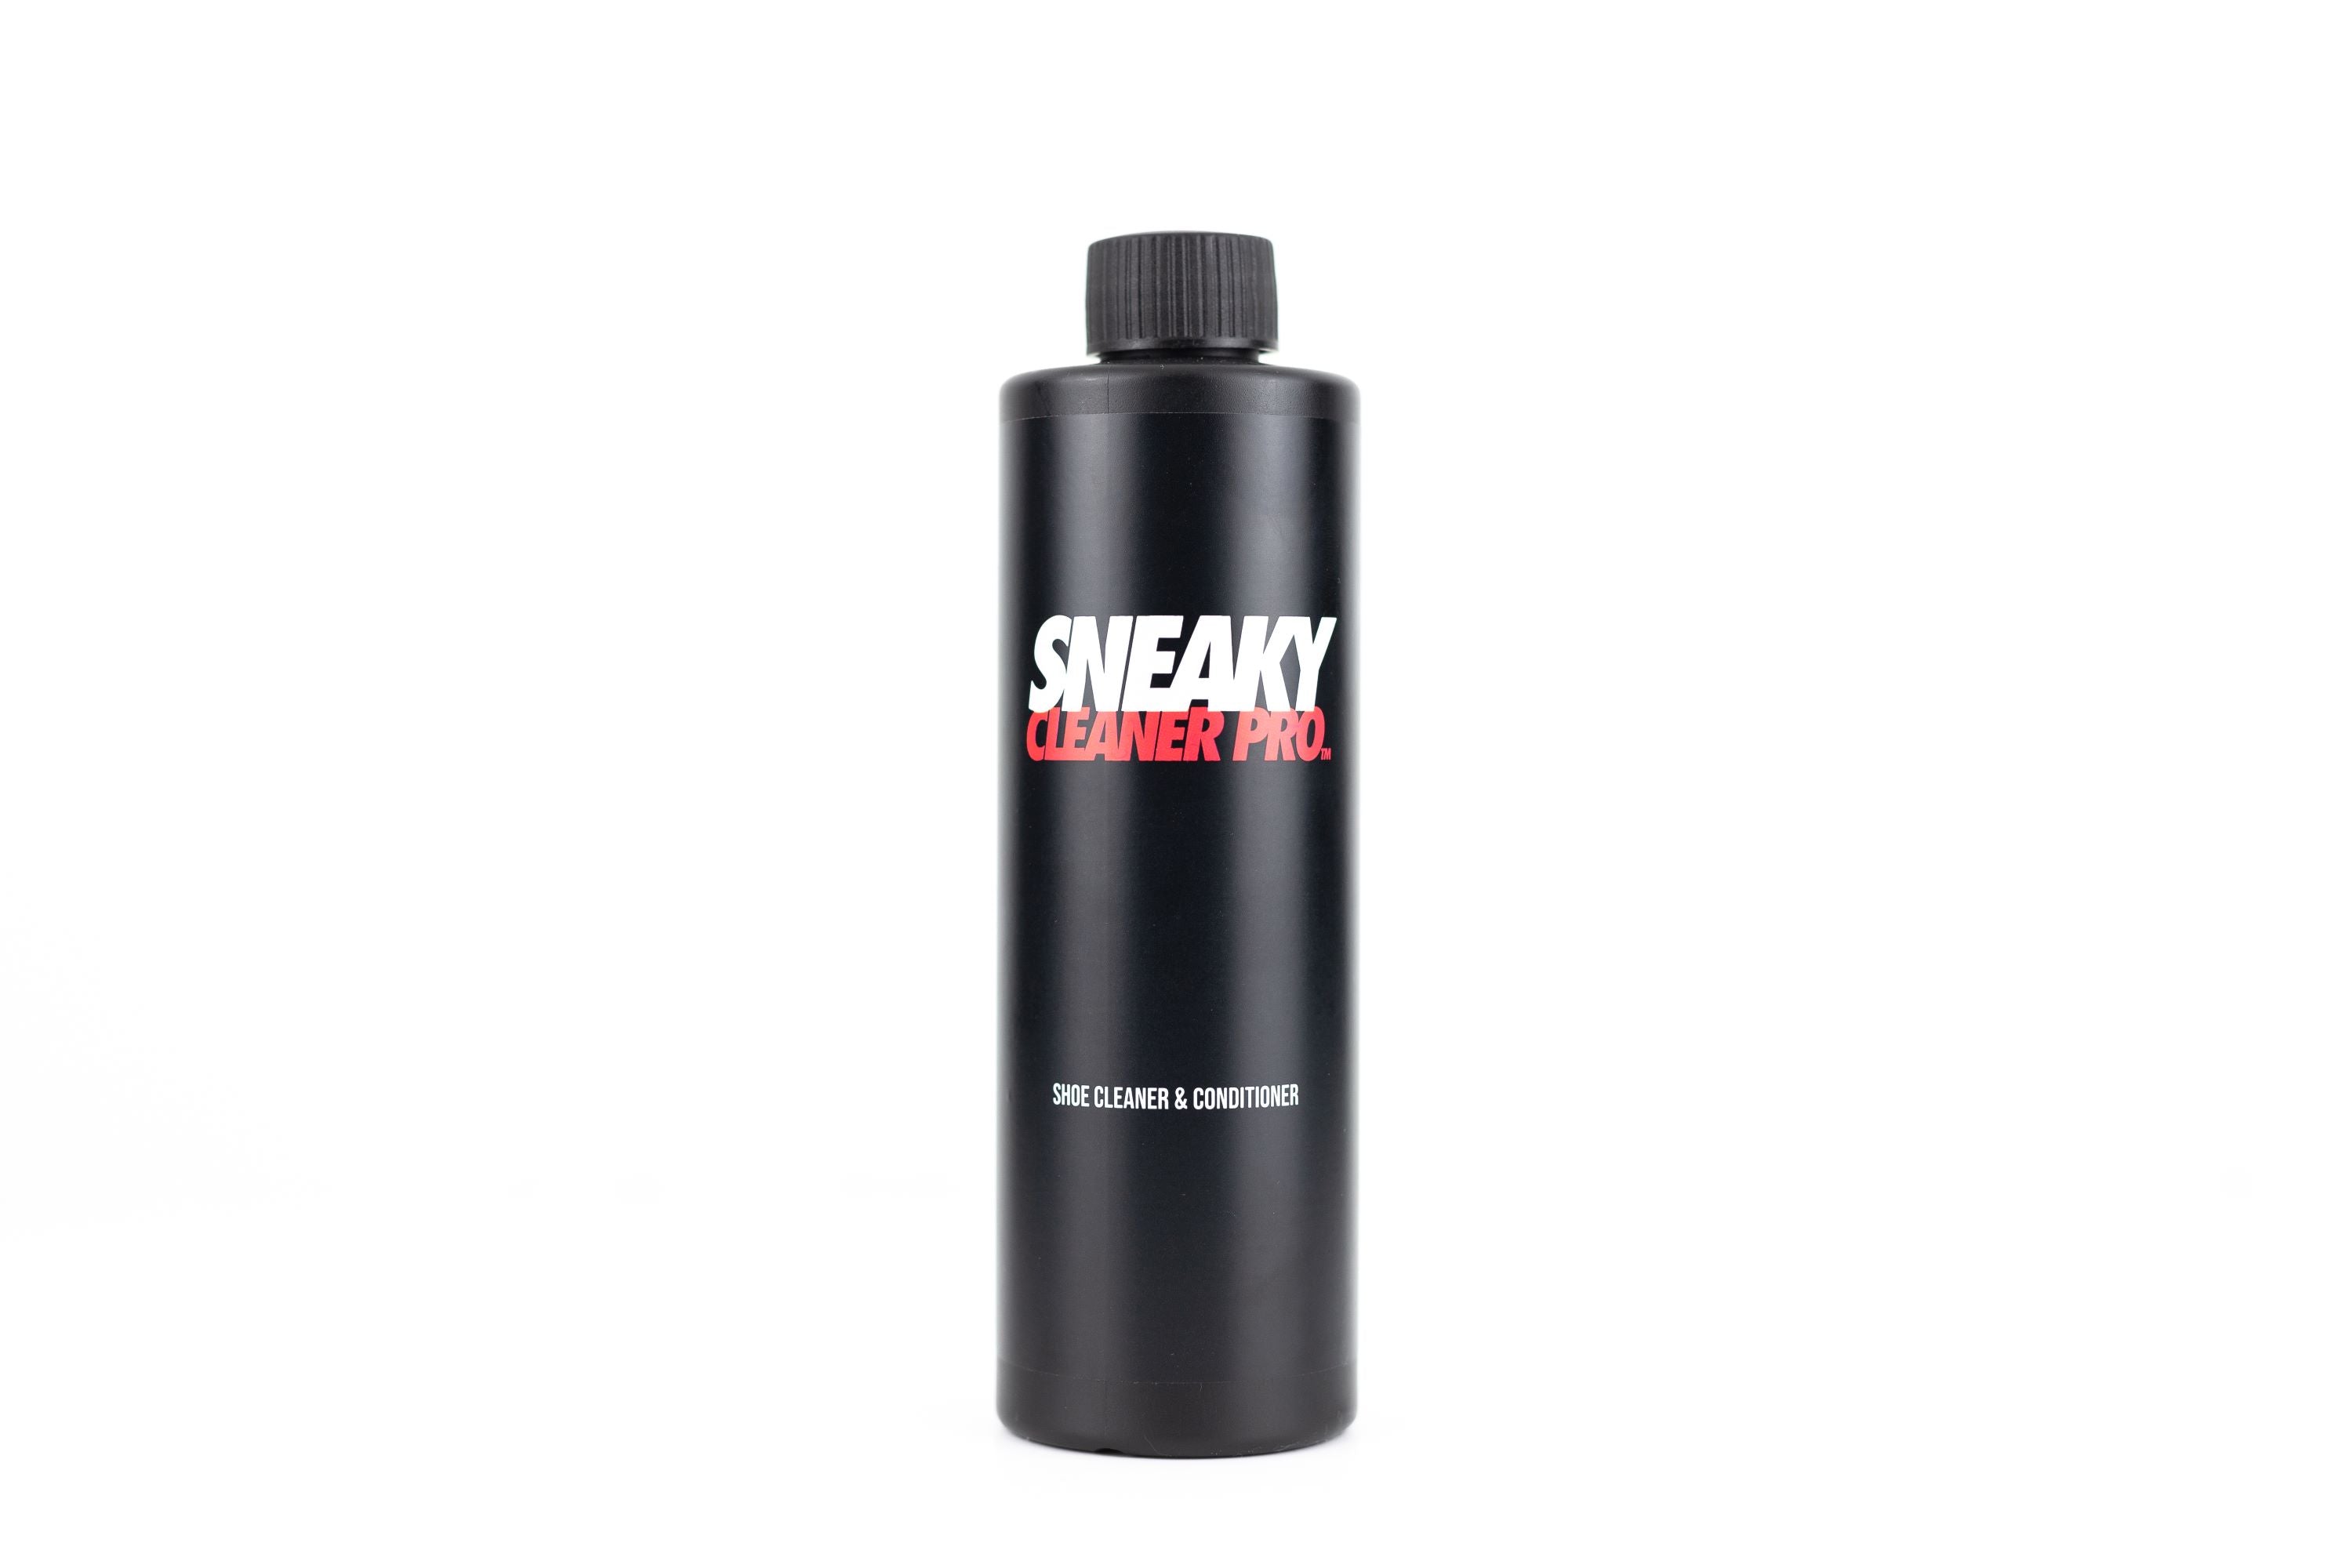 Sneaky Cleaner Pro - Shoe Cleaner & Conditioner